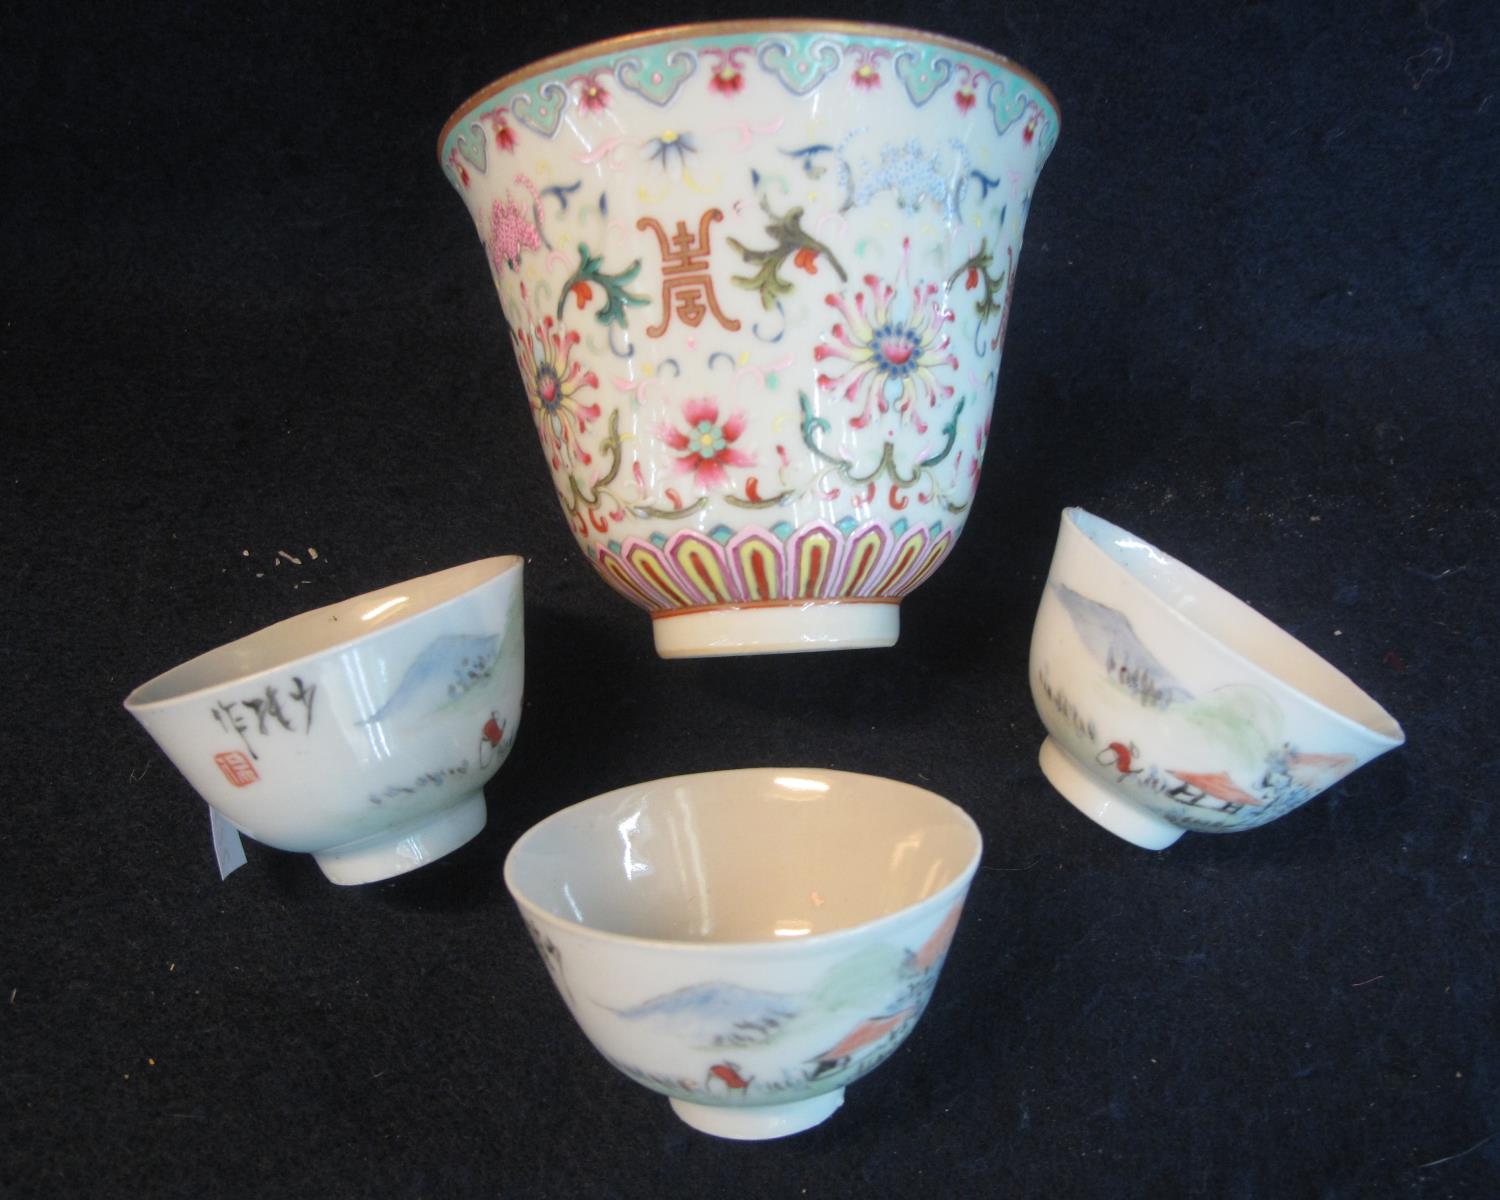 Good quality Chinese porcelain everted cup or vase, externally decorated with enamelled foliate